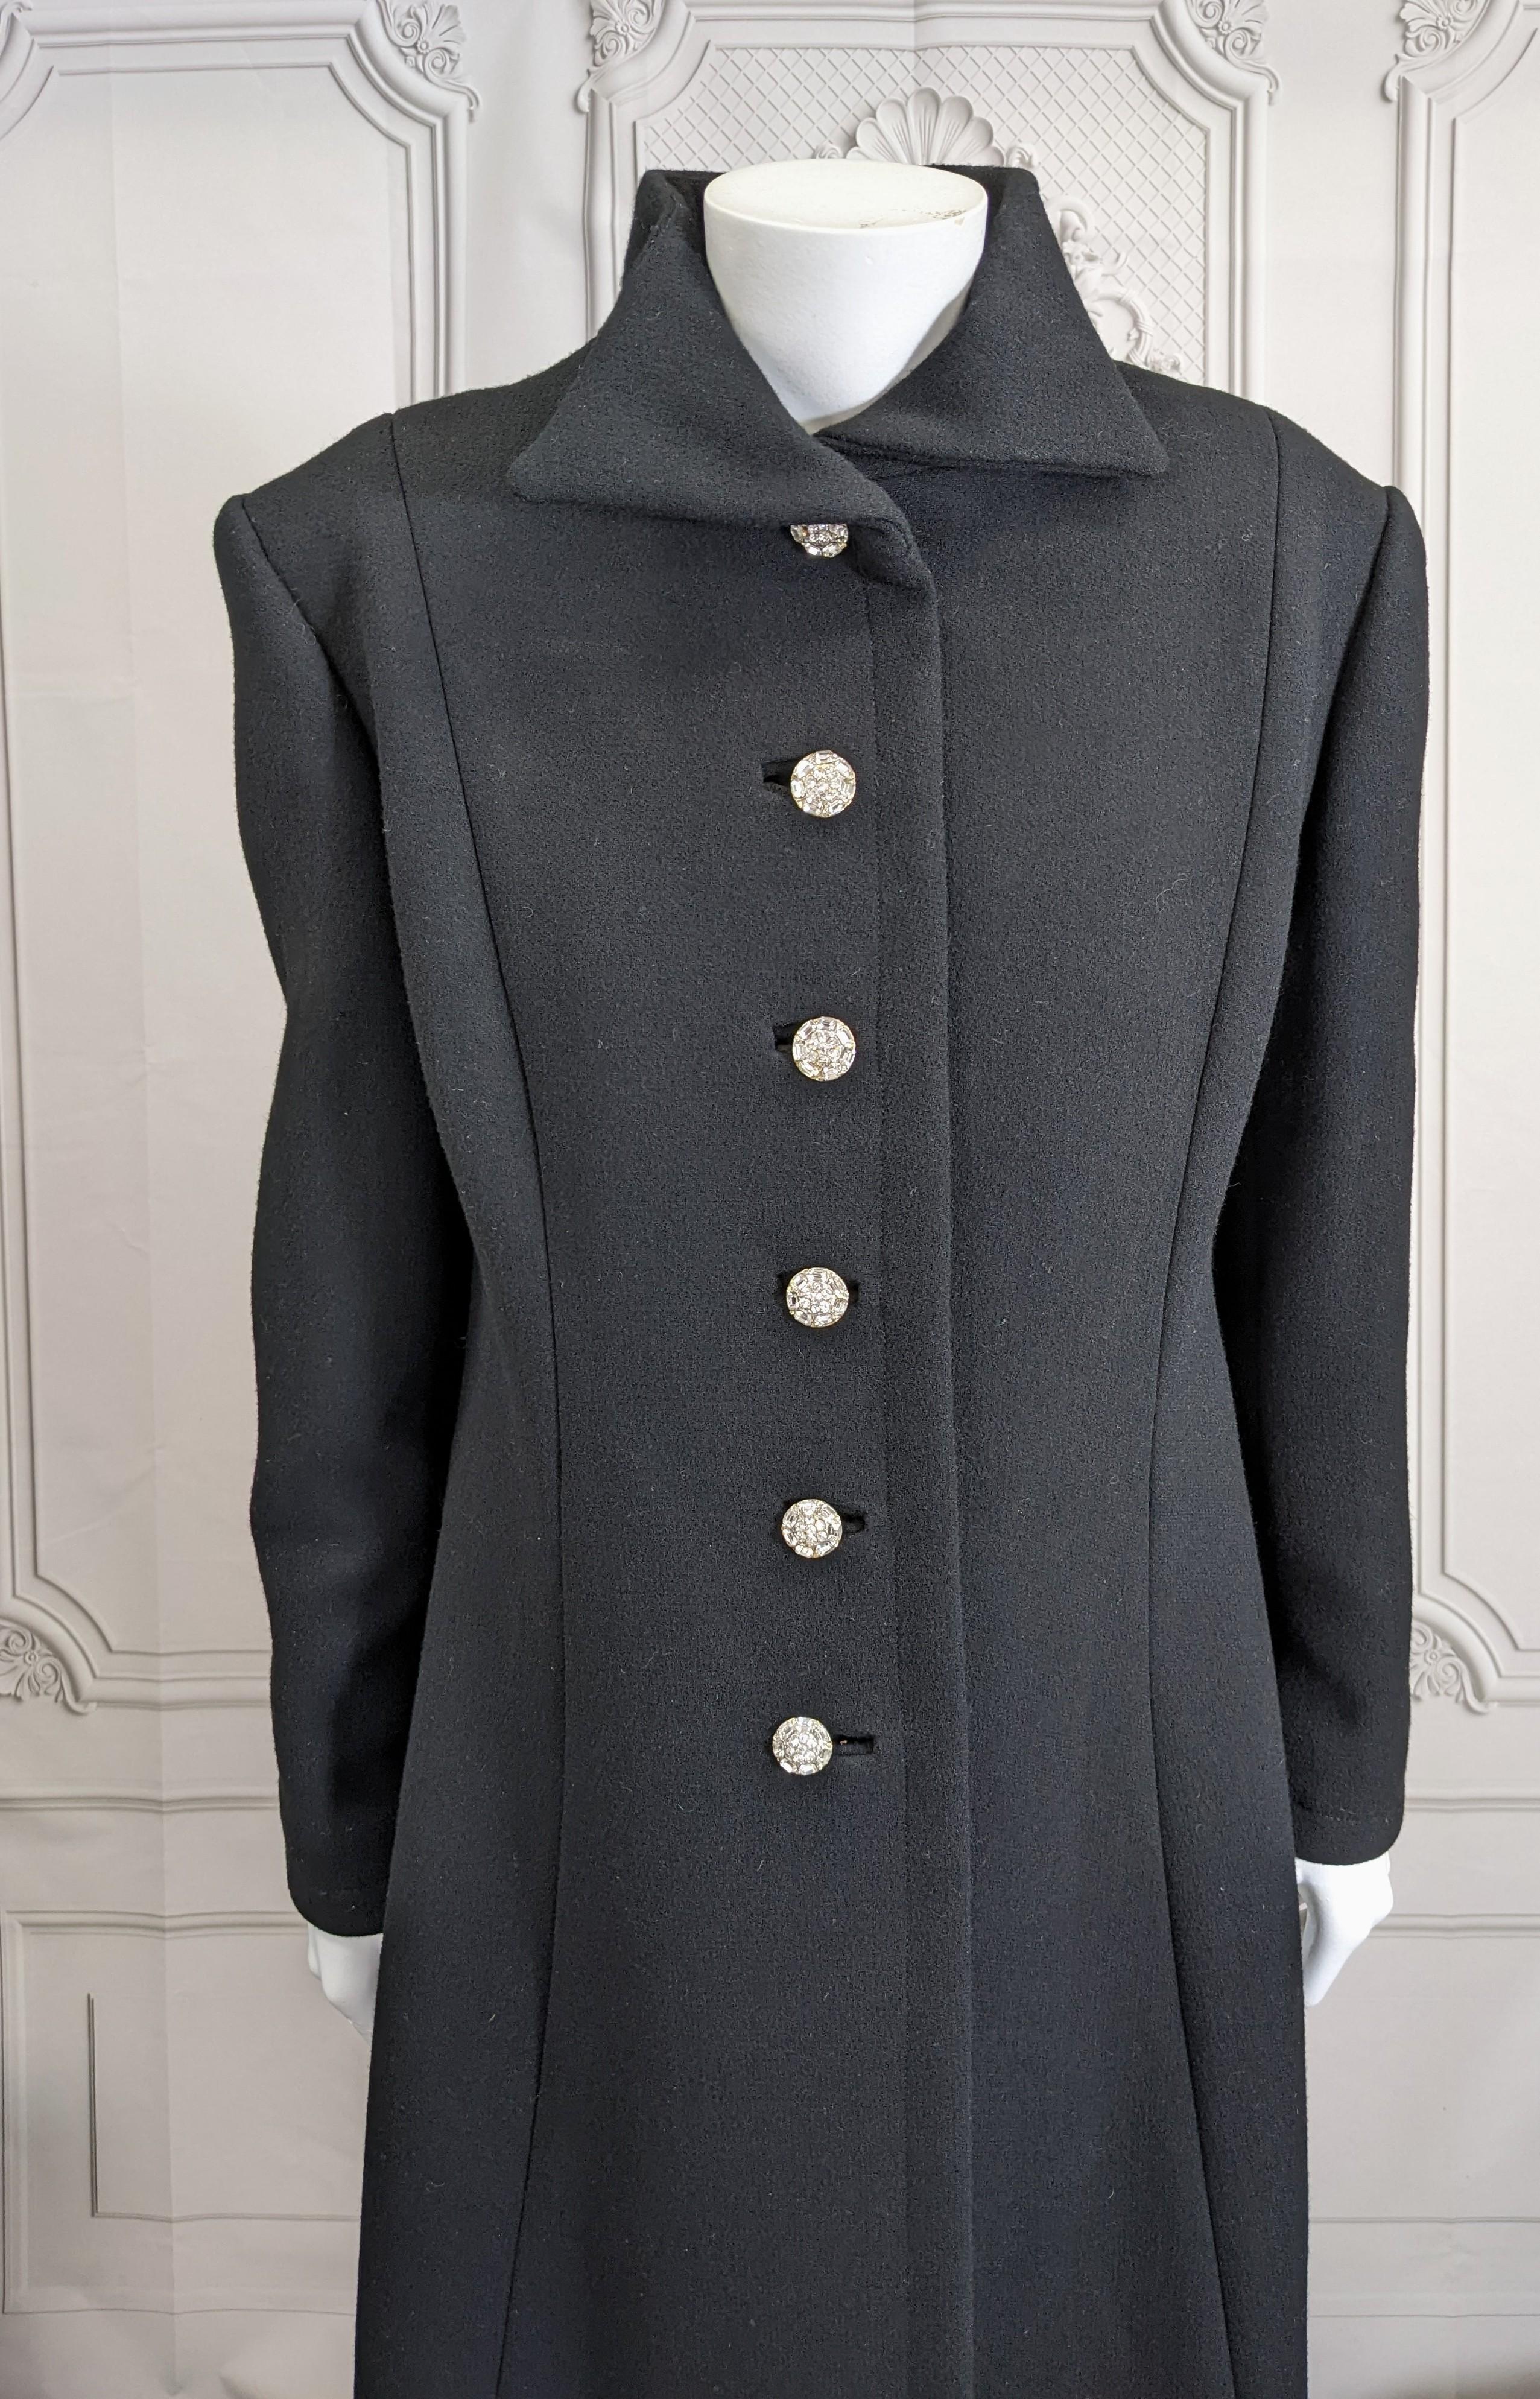 Diamonte Buttoned Black Evening Coat In Good Condition For Sale In New York, NY